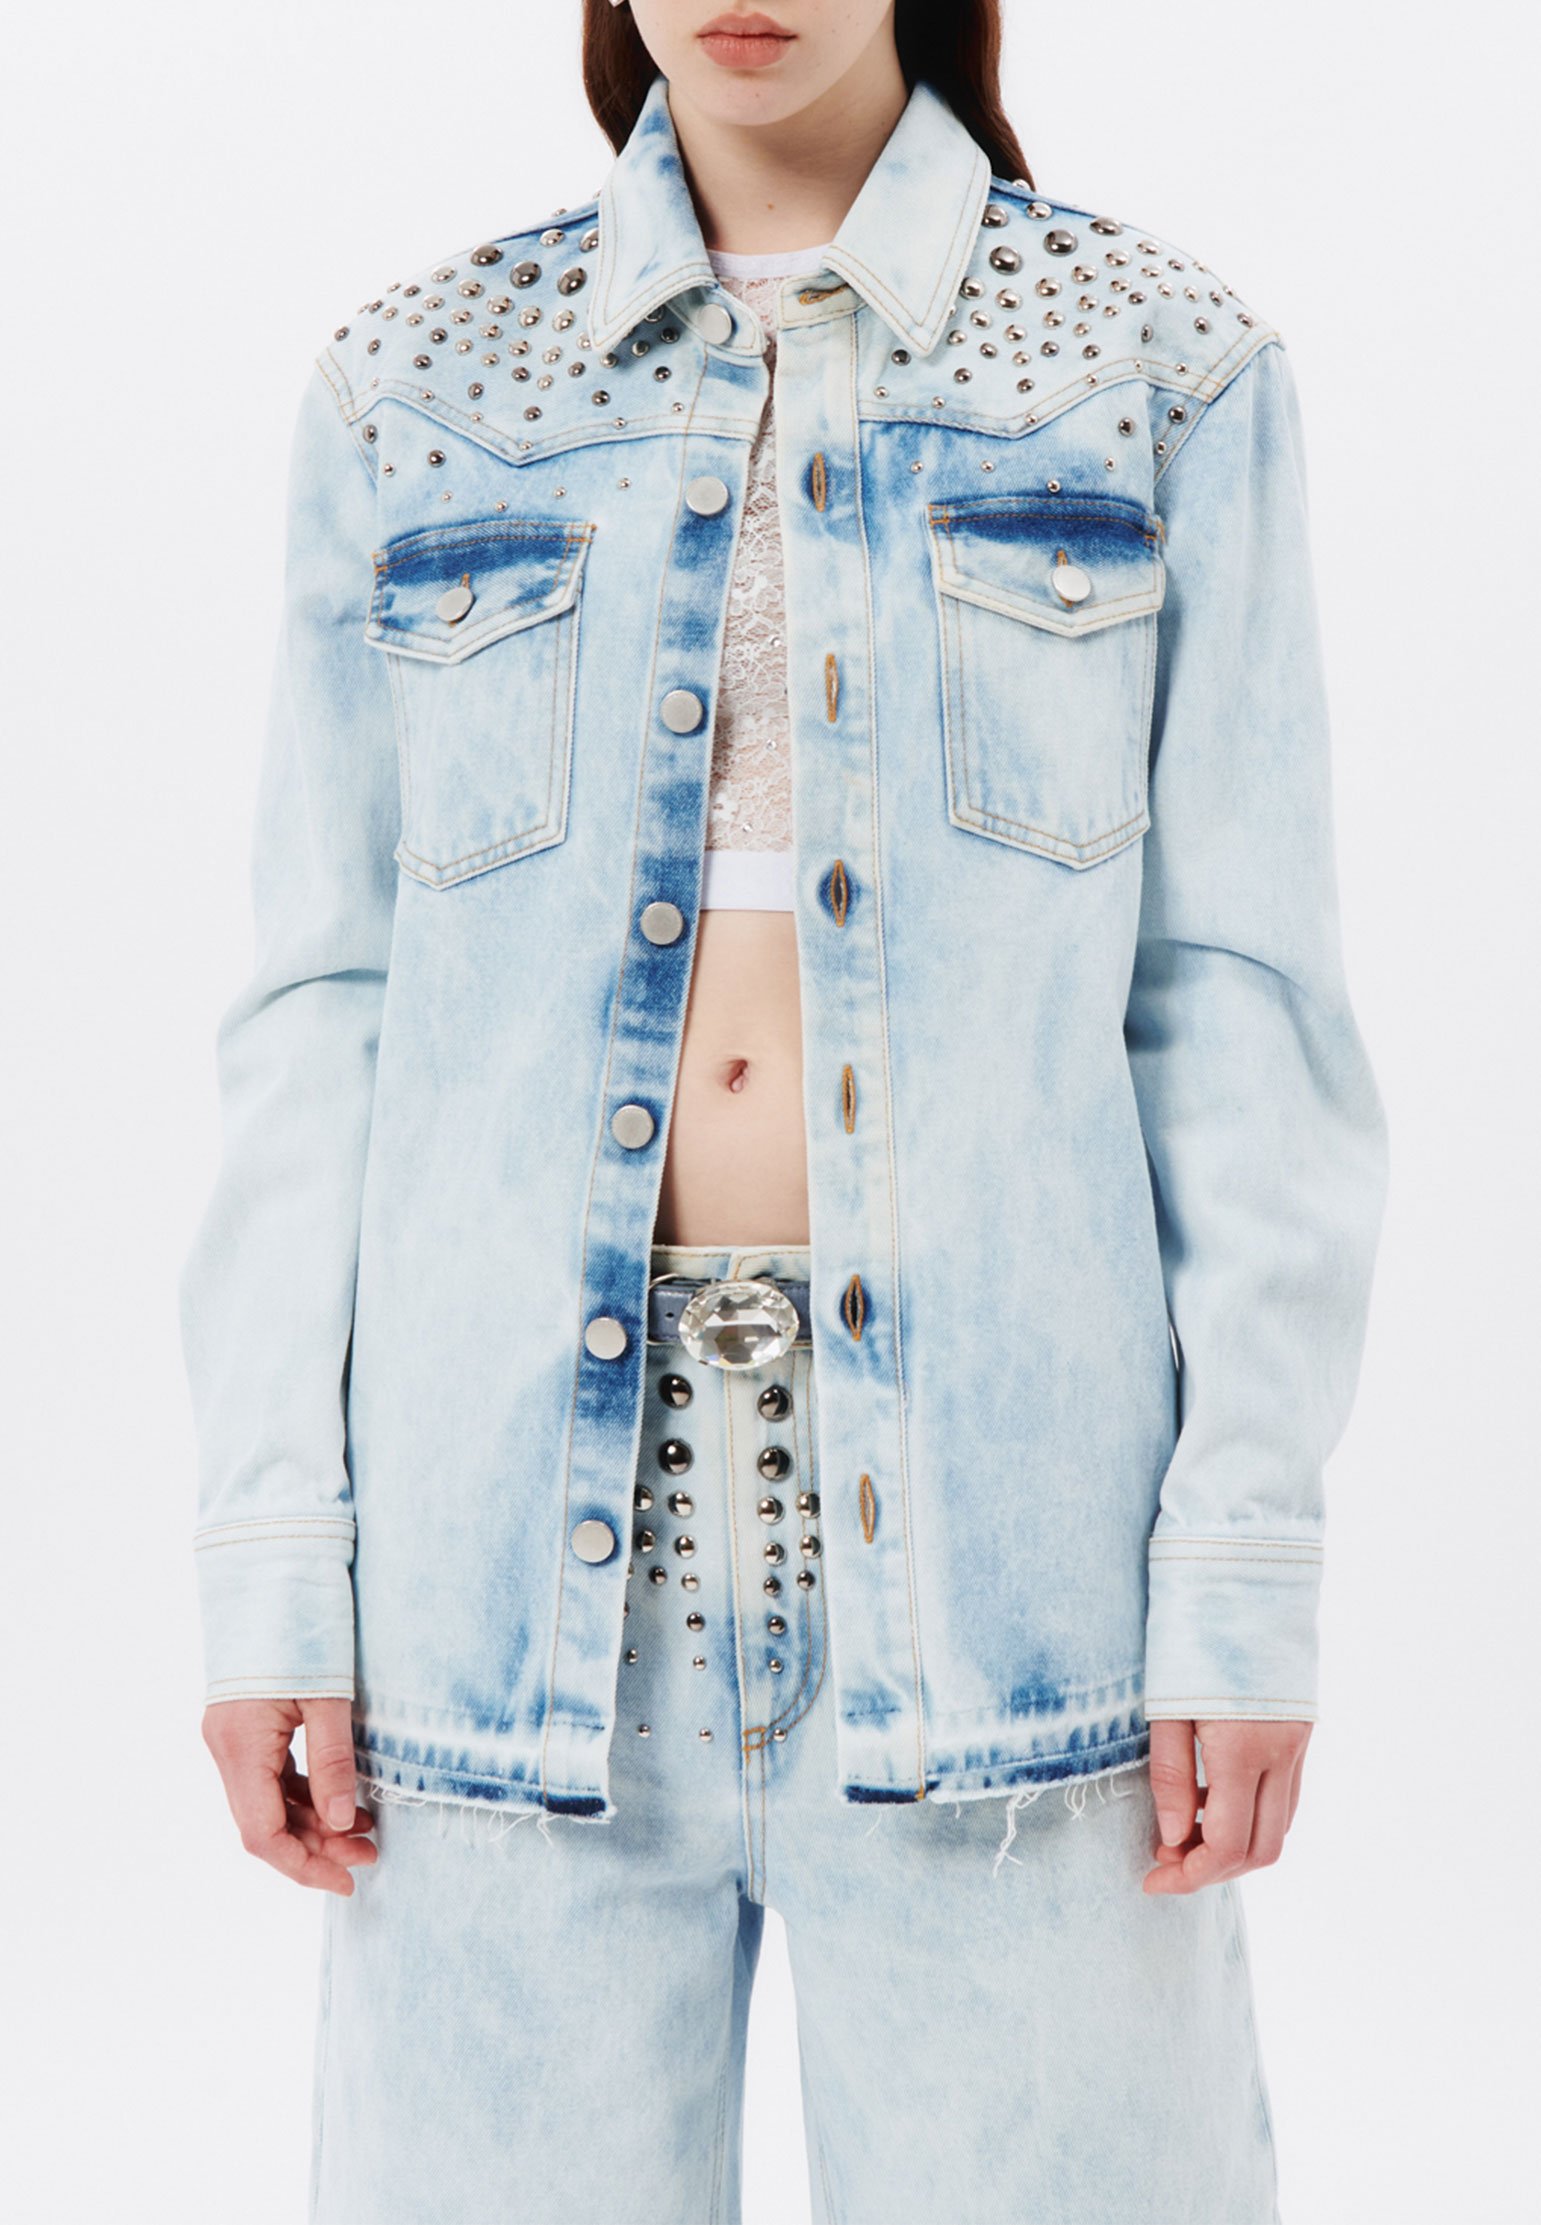 Jacket ALESSANDRA RICH Color: light blue (Code: 3733) in online store Allure